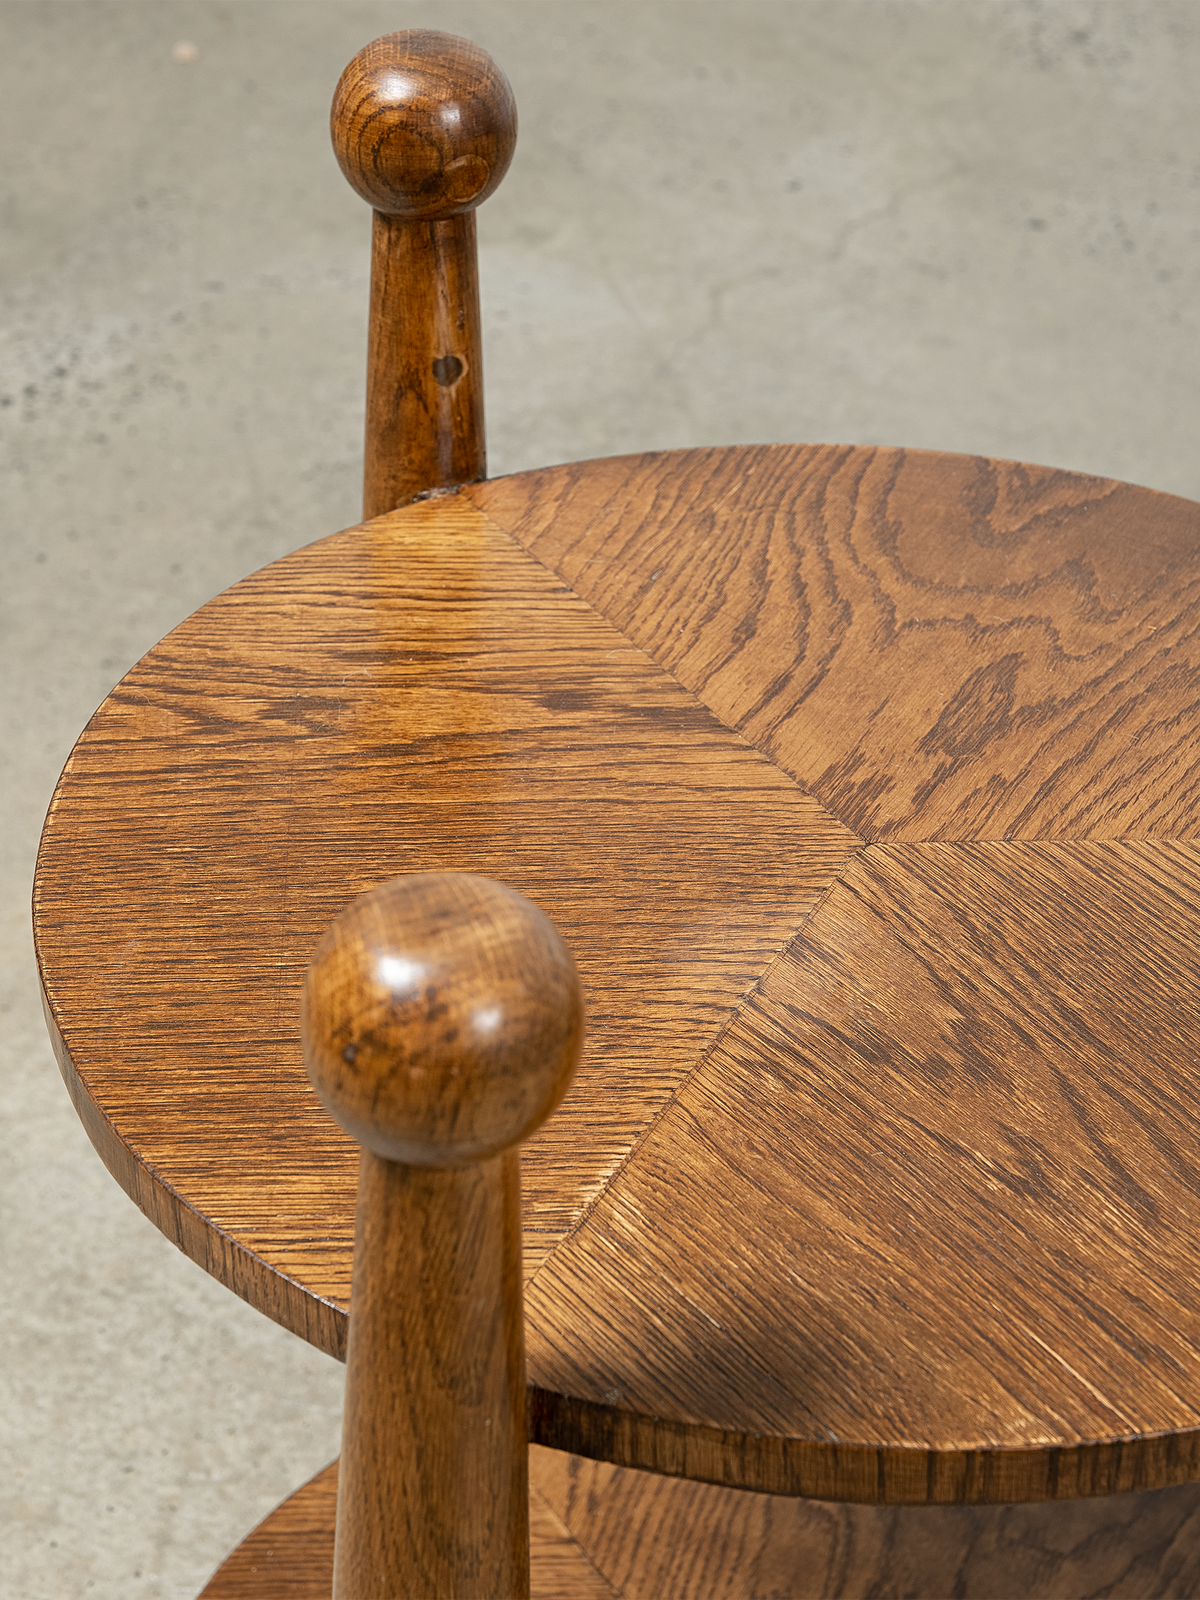 1940s French Oak Circular Side Table